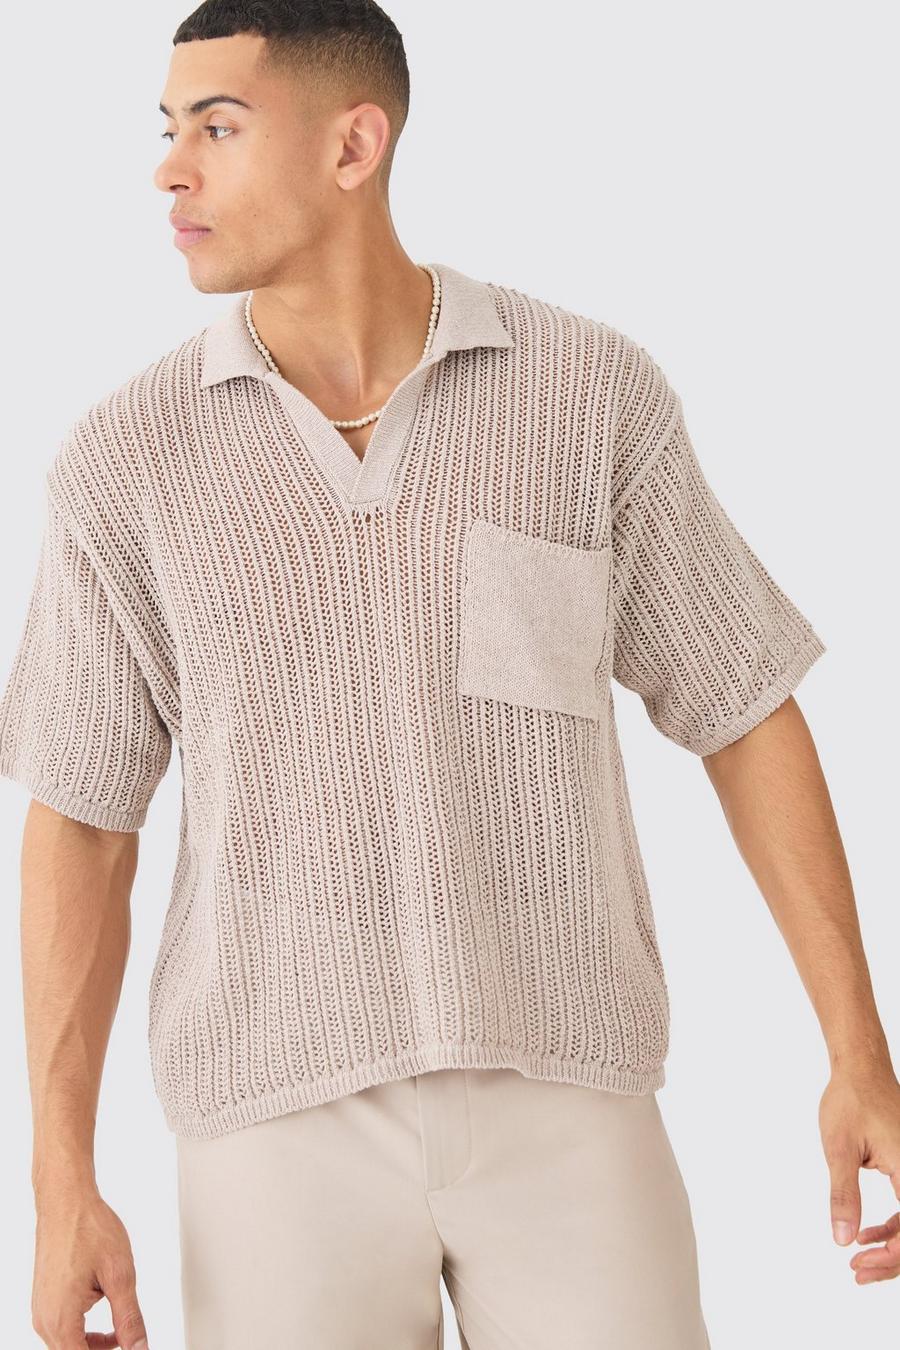 Oversized Boxy Open Stitch Polo With Pocket In Stone